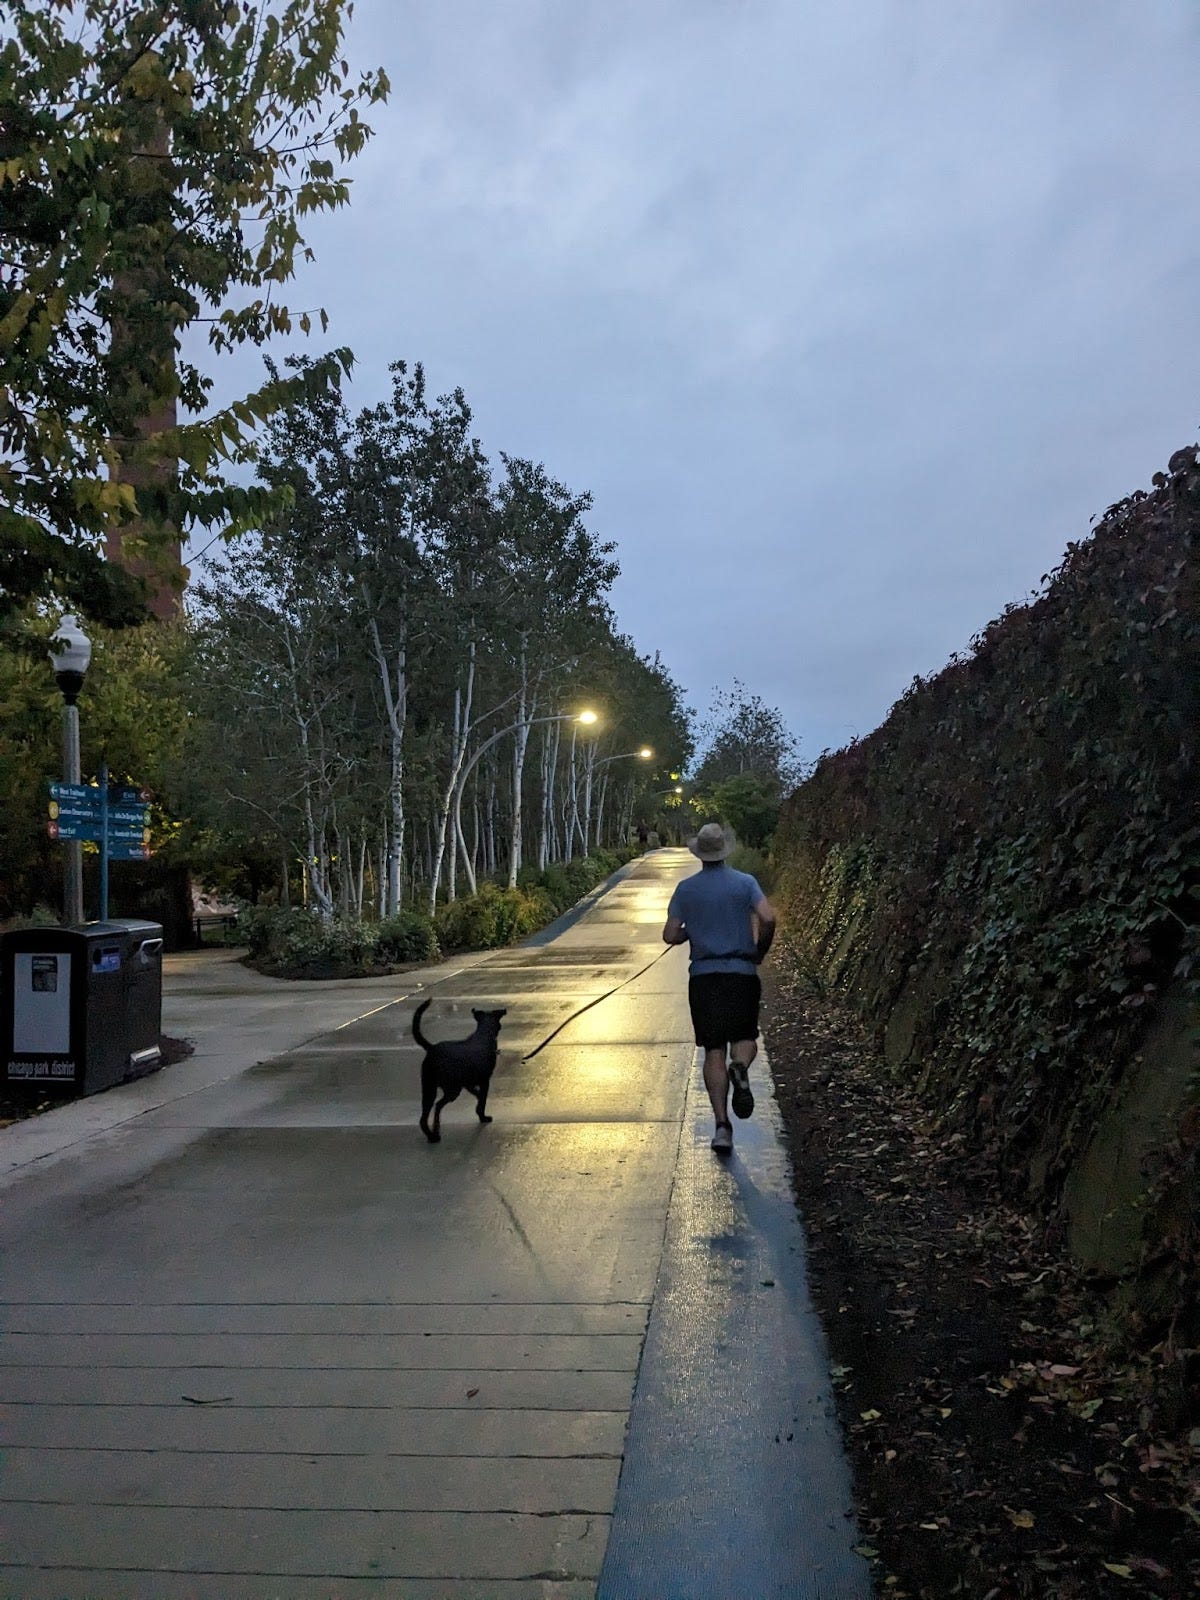 It's a rainy evening in the 606 trail in Chicago. A person runs alongside their black dog who's on a leash, running alongside tall trees